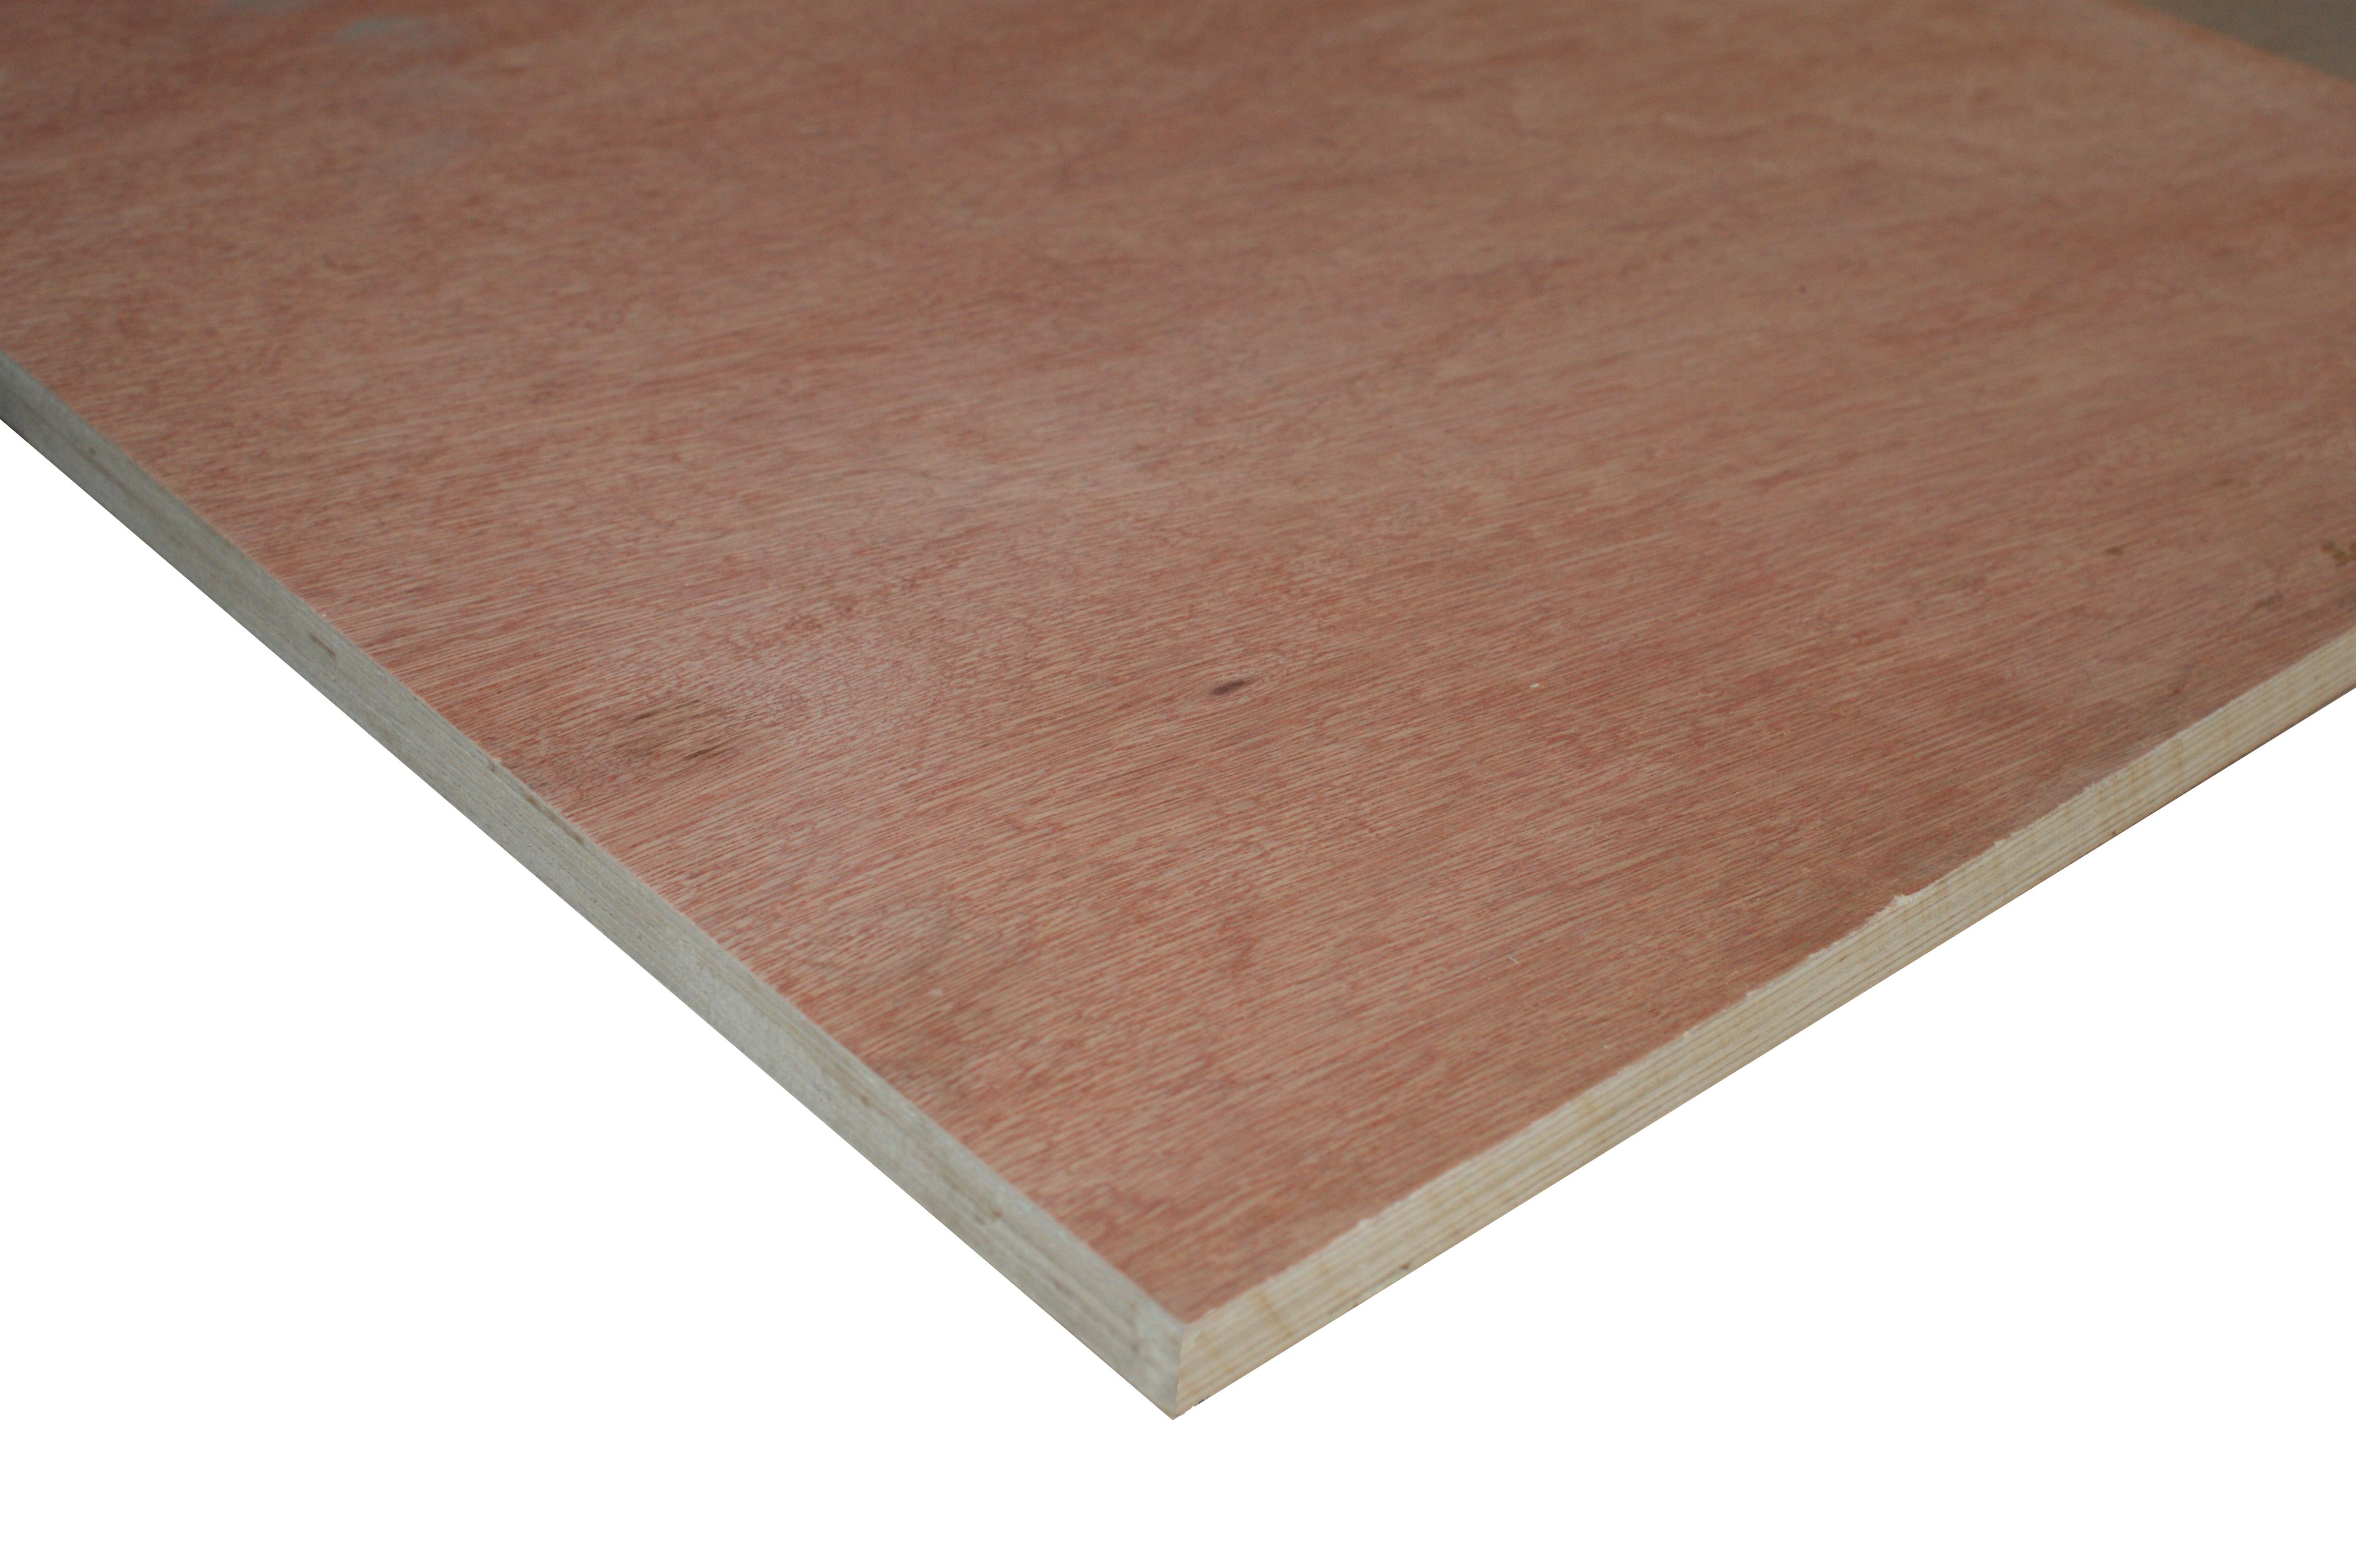 Non-Structural Hardwood Plywood Sheet - 18 x 606 x 1220mm